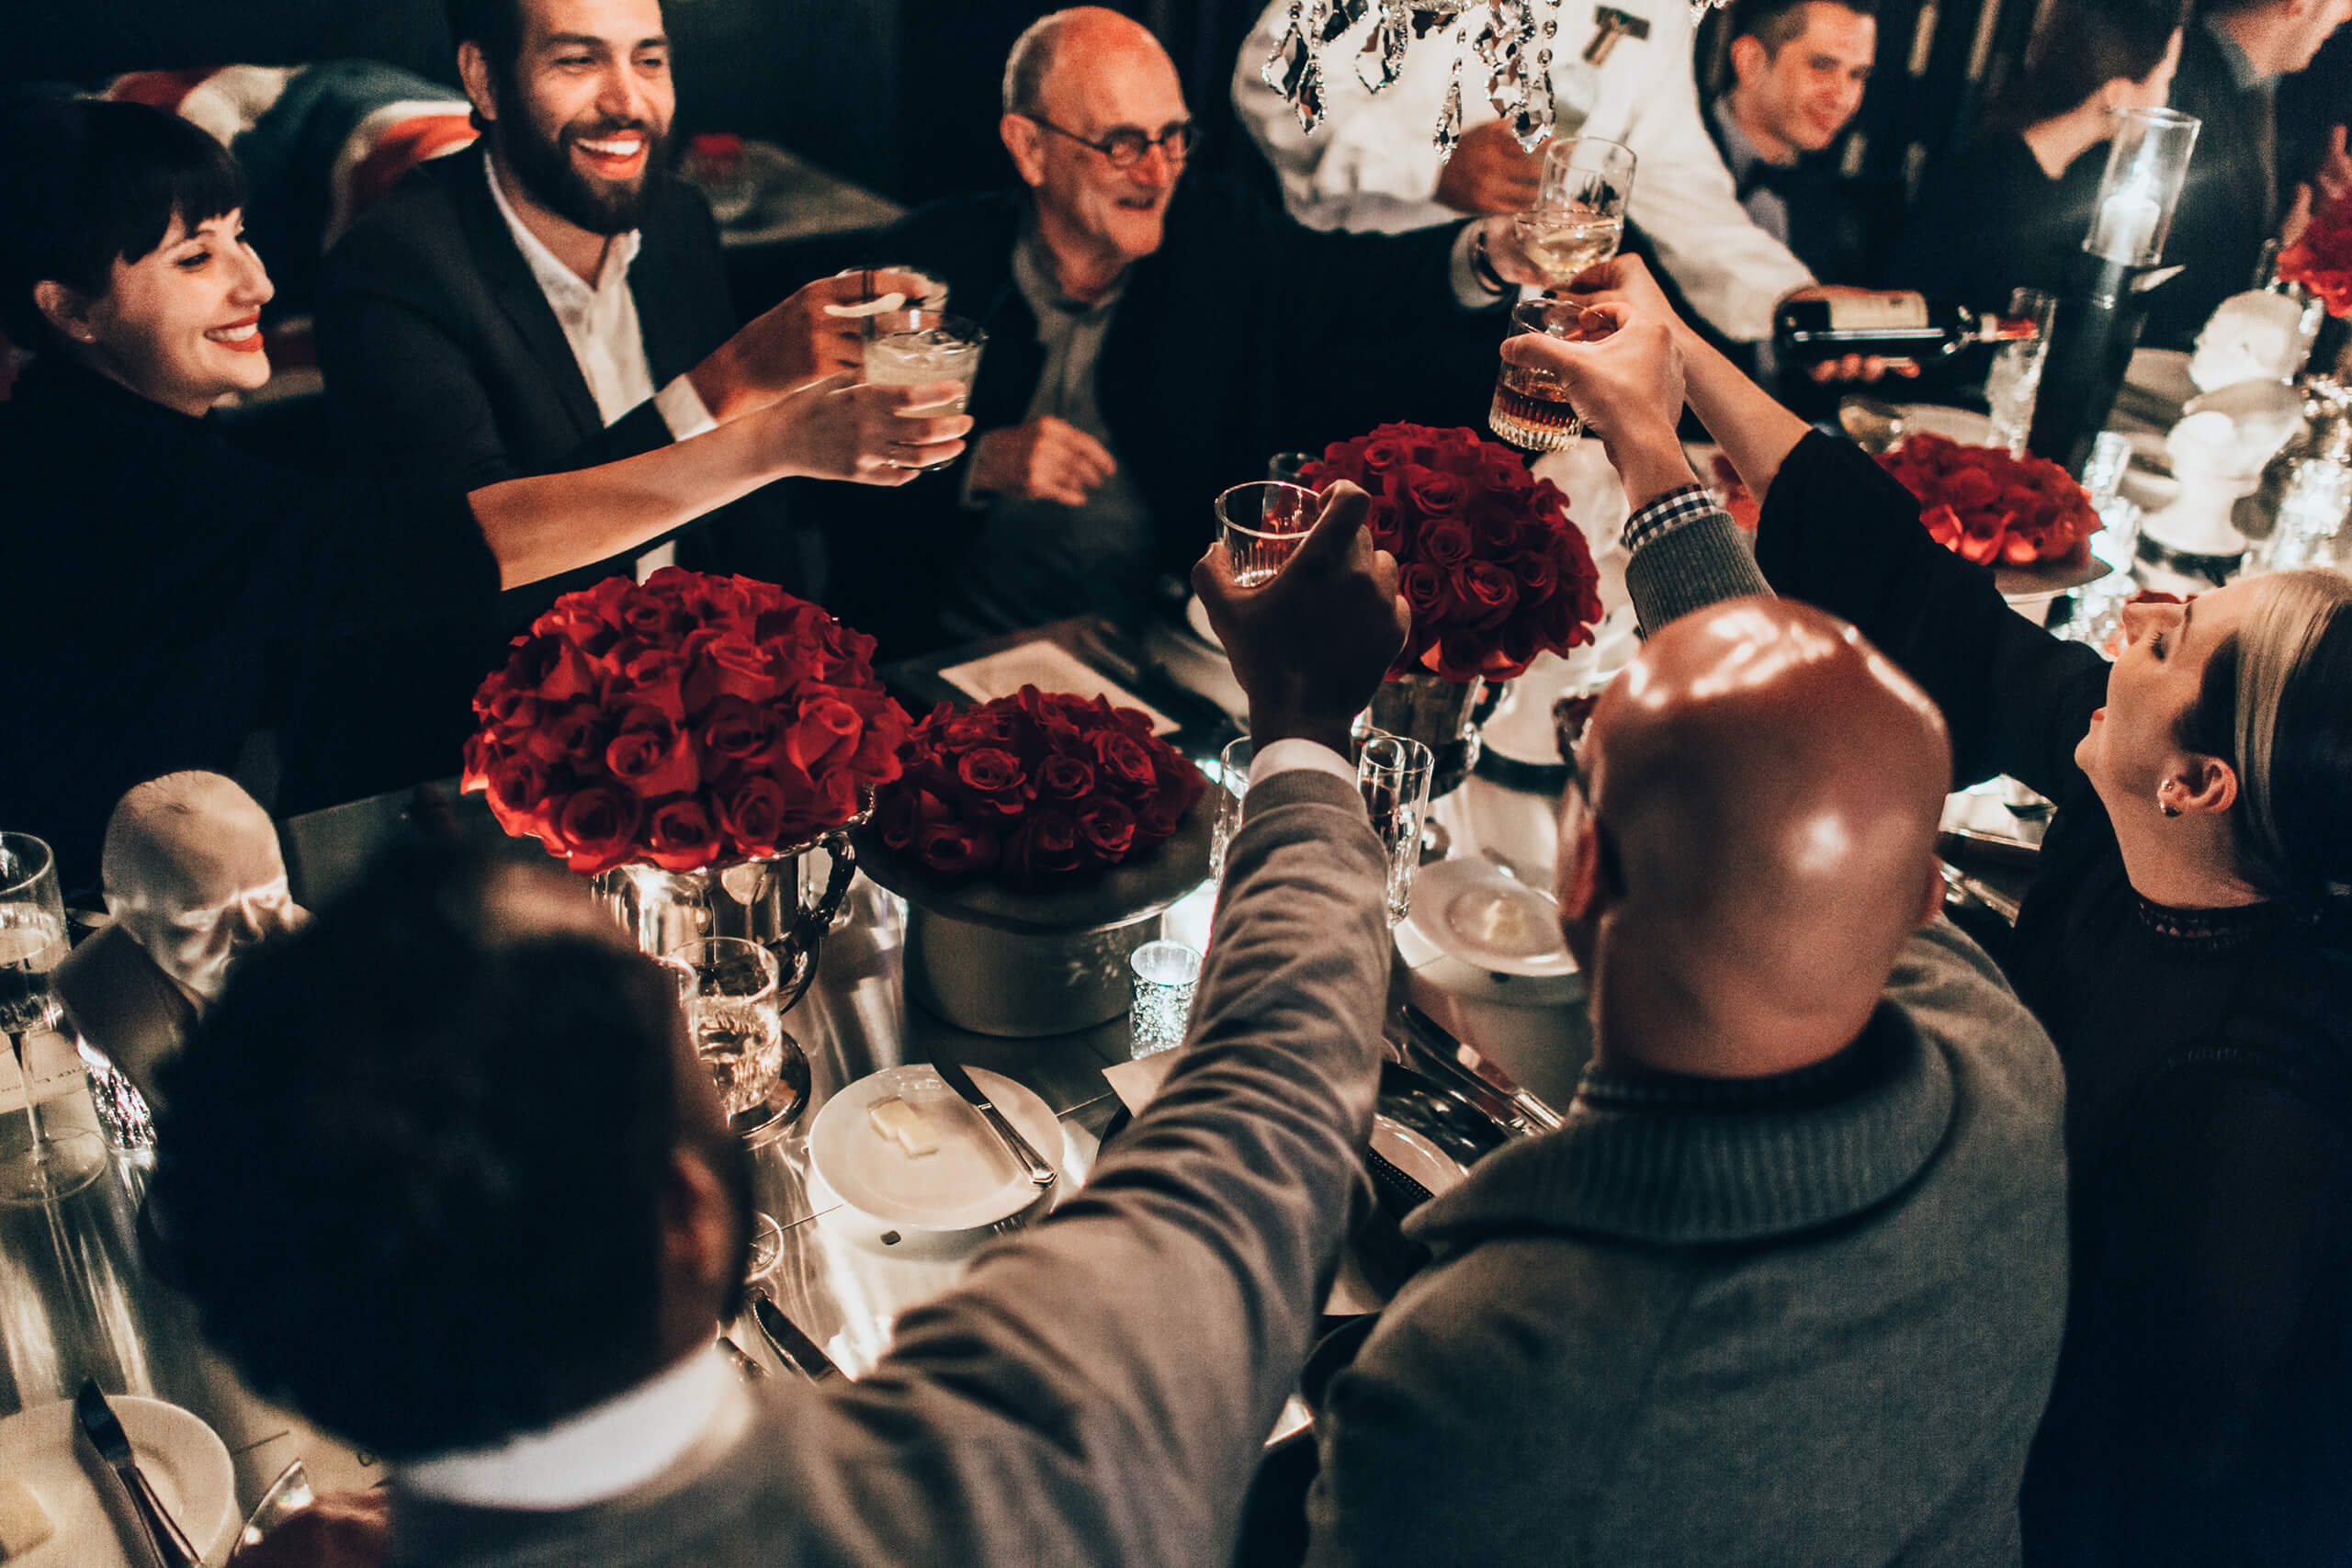 A group of friends raising their glasses in a toast at a beautifully set dinner table